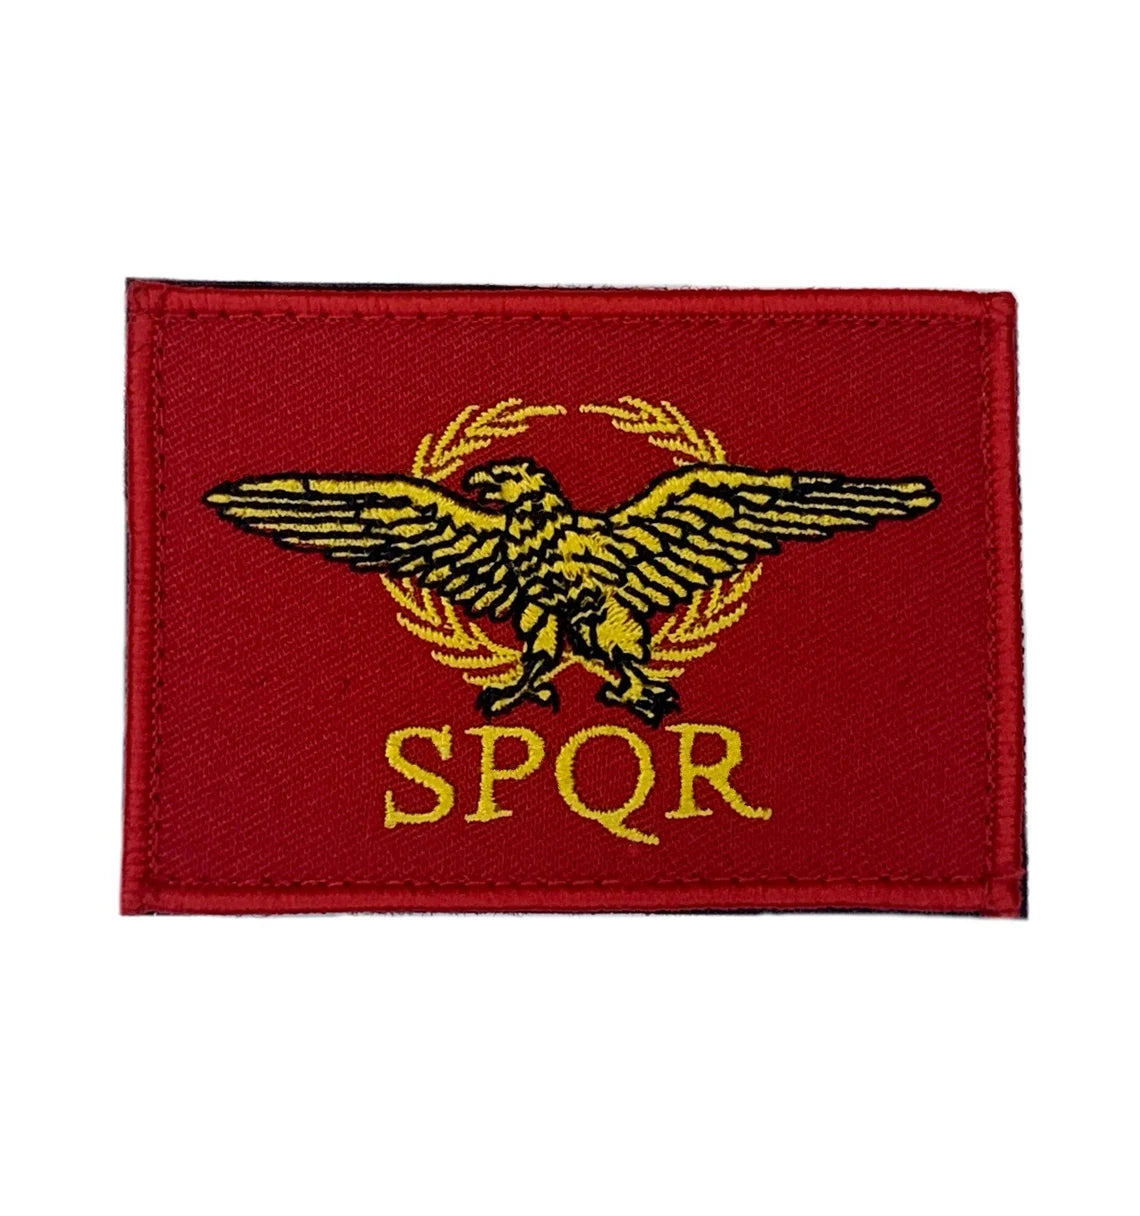 SPQR Ancient Roman Empire Lost Legion Patch (3 Inch) Hook and Loop Velcro Badge Rome Soldier Golden Eagle Flag Costume Patches